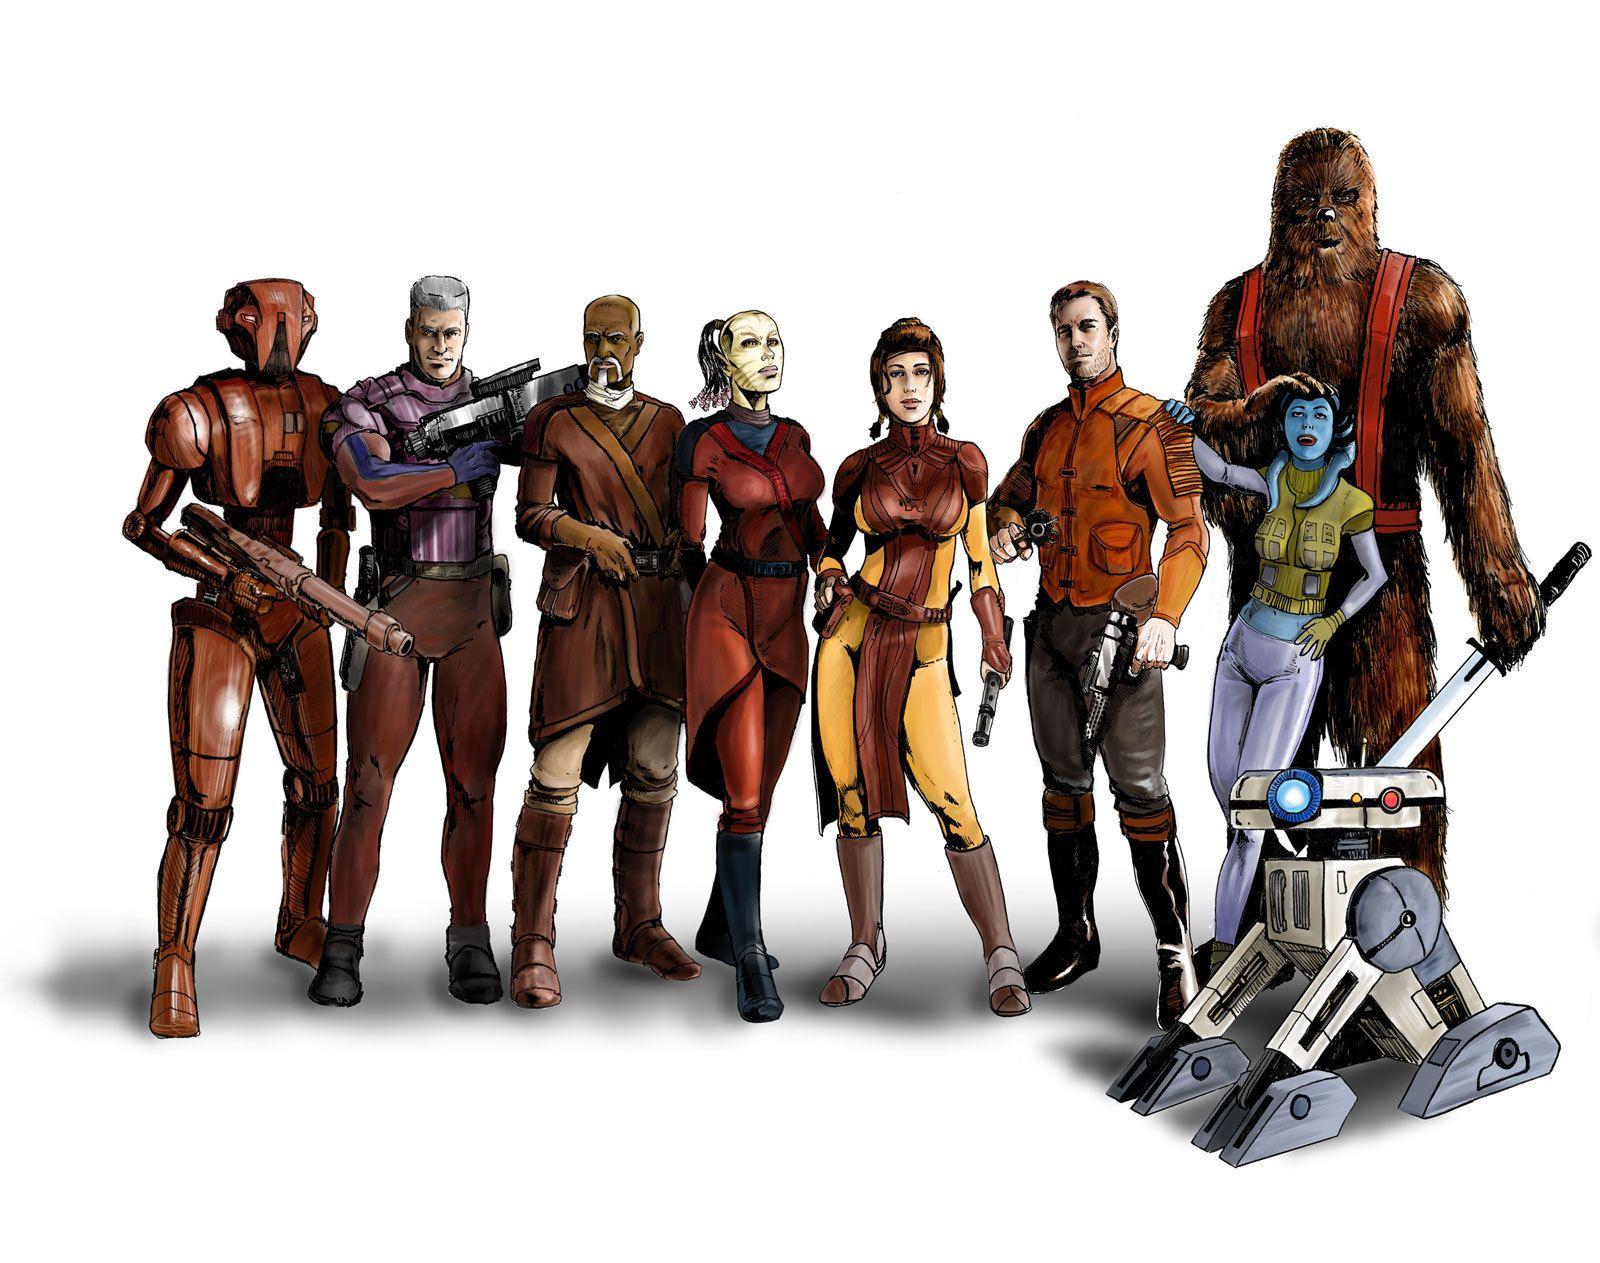 Star wars knights of the old republic wallpapers Gallery